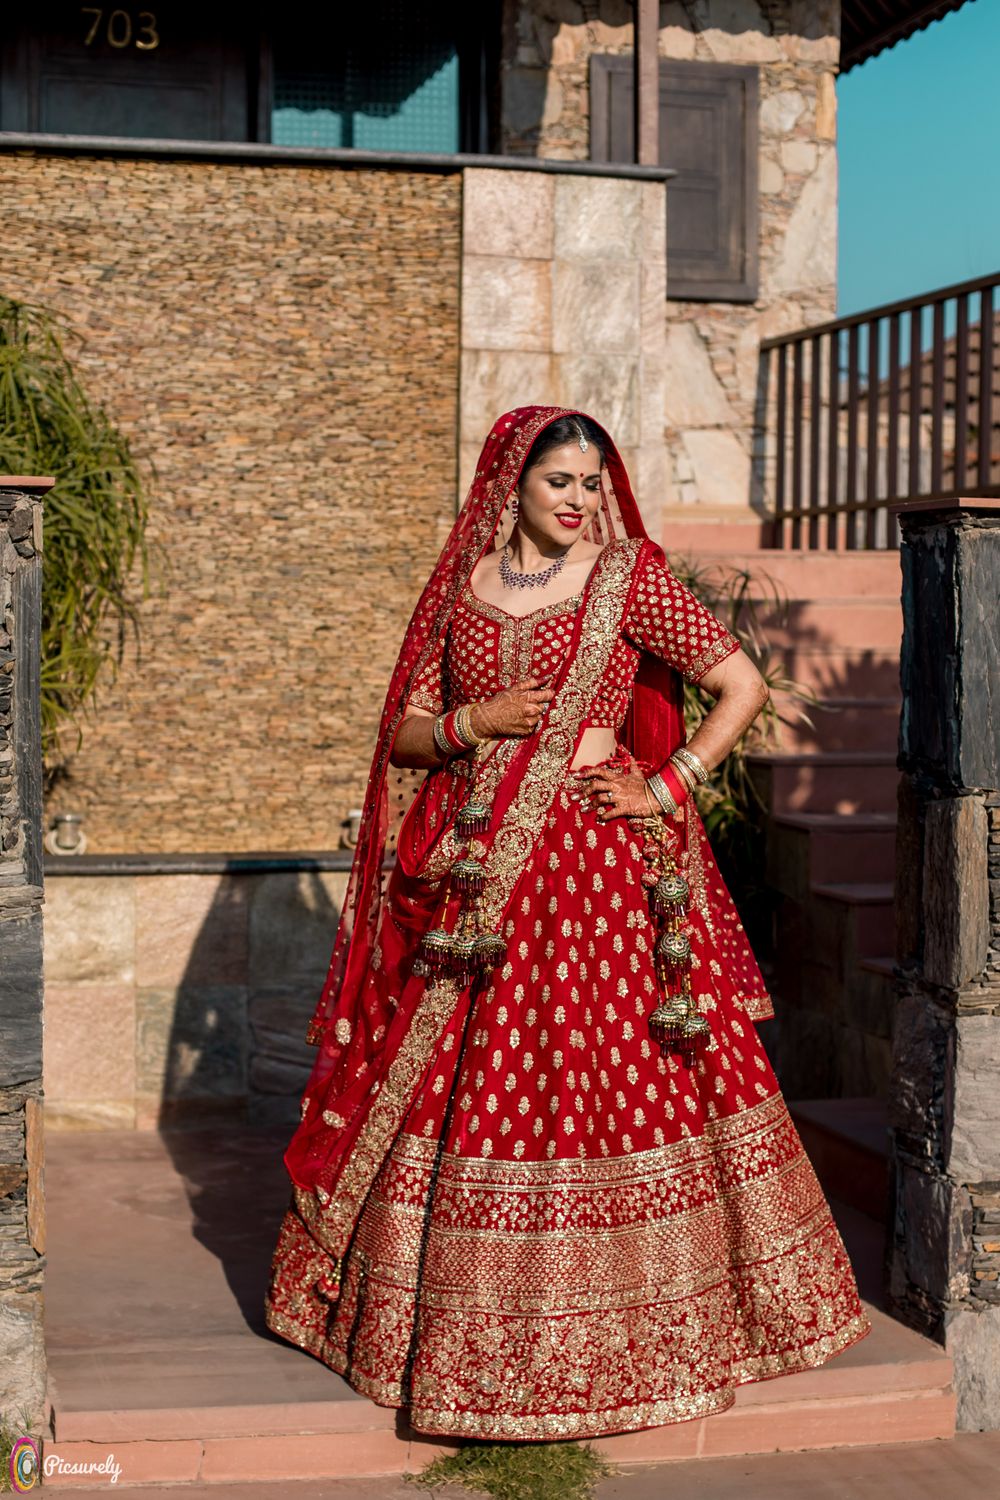 Photo of Red and gold bridal lehenga with unique latkan